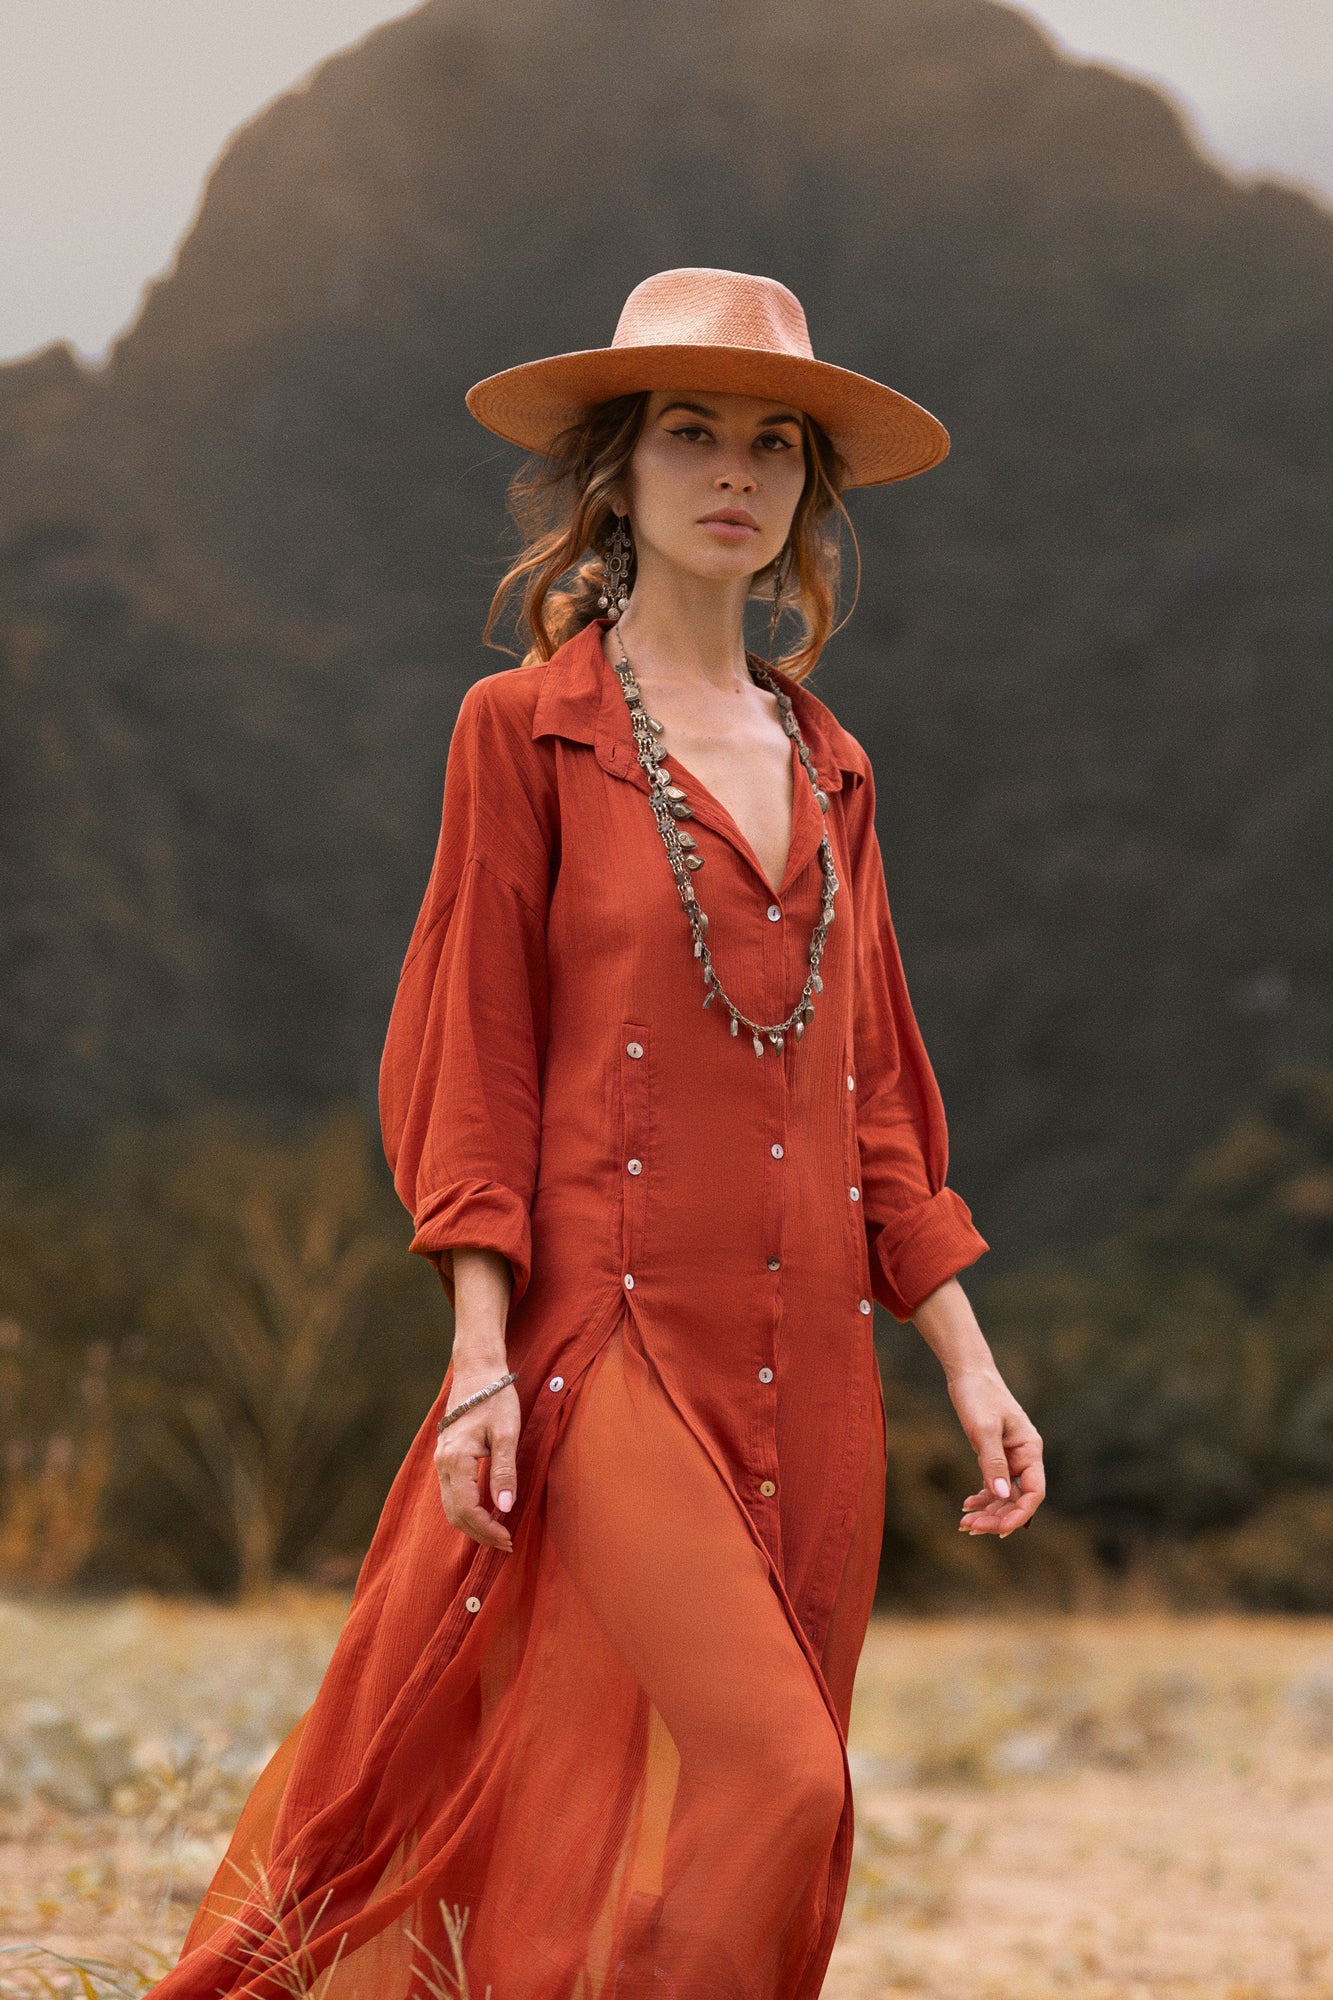 Magic in Red: Handmade Shirt Dress – AYA's Kannika Dress offers versatility with buttons, letting you play with styles and shapes for a one-of-a-kind fashion statement